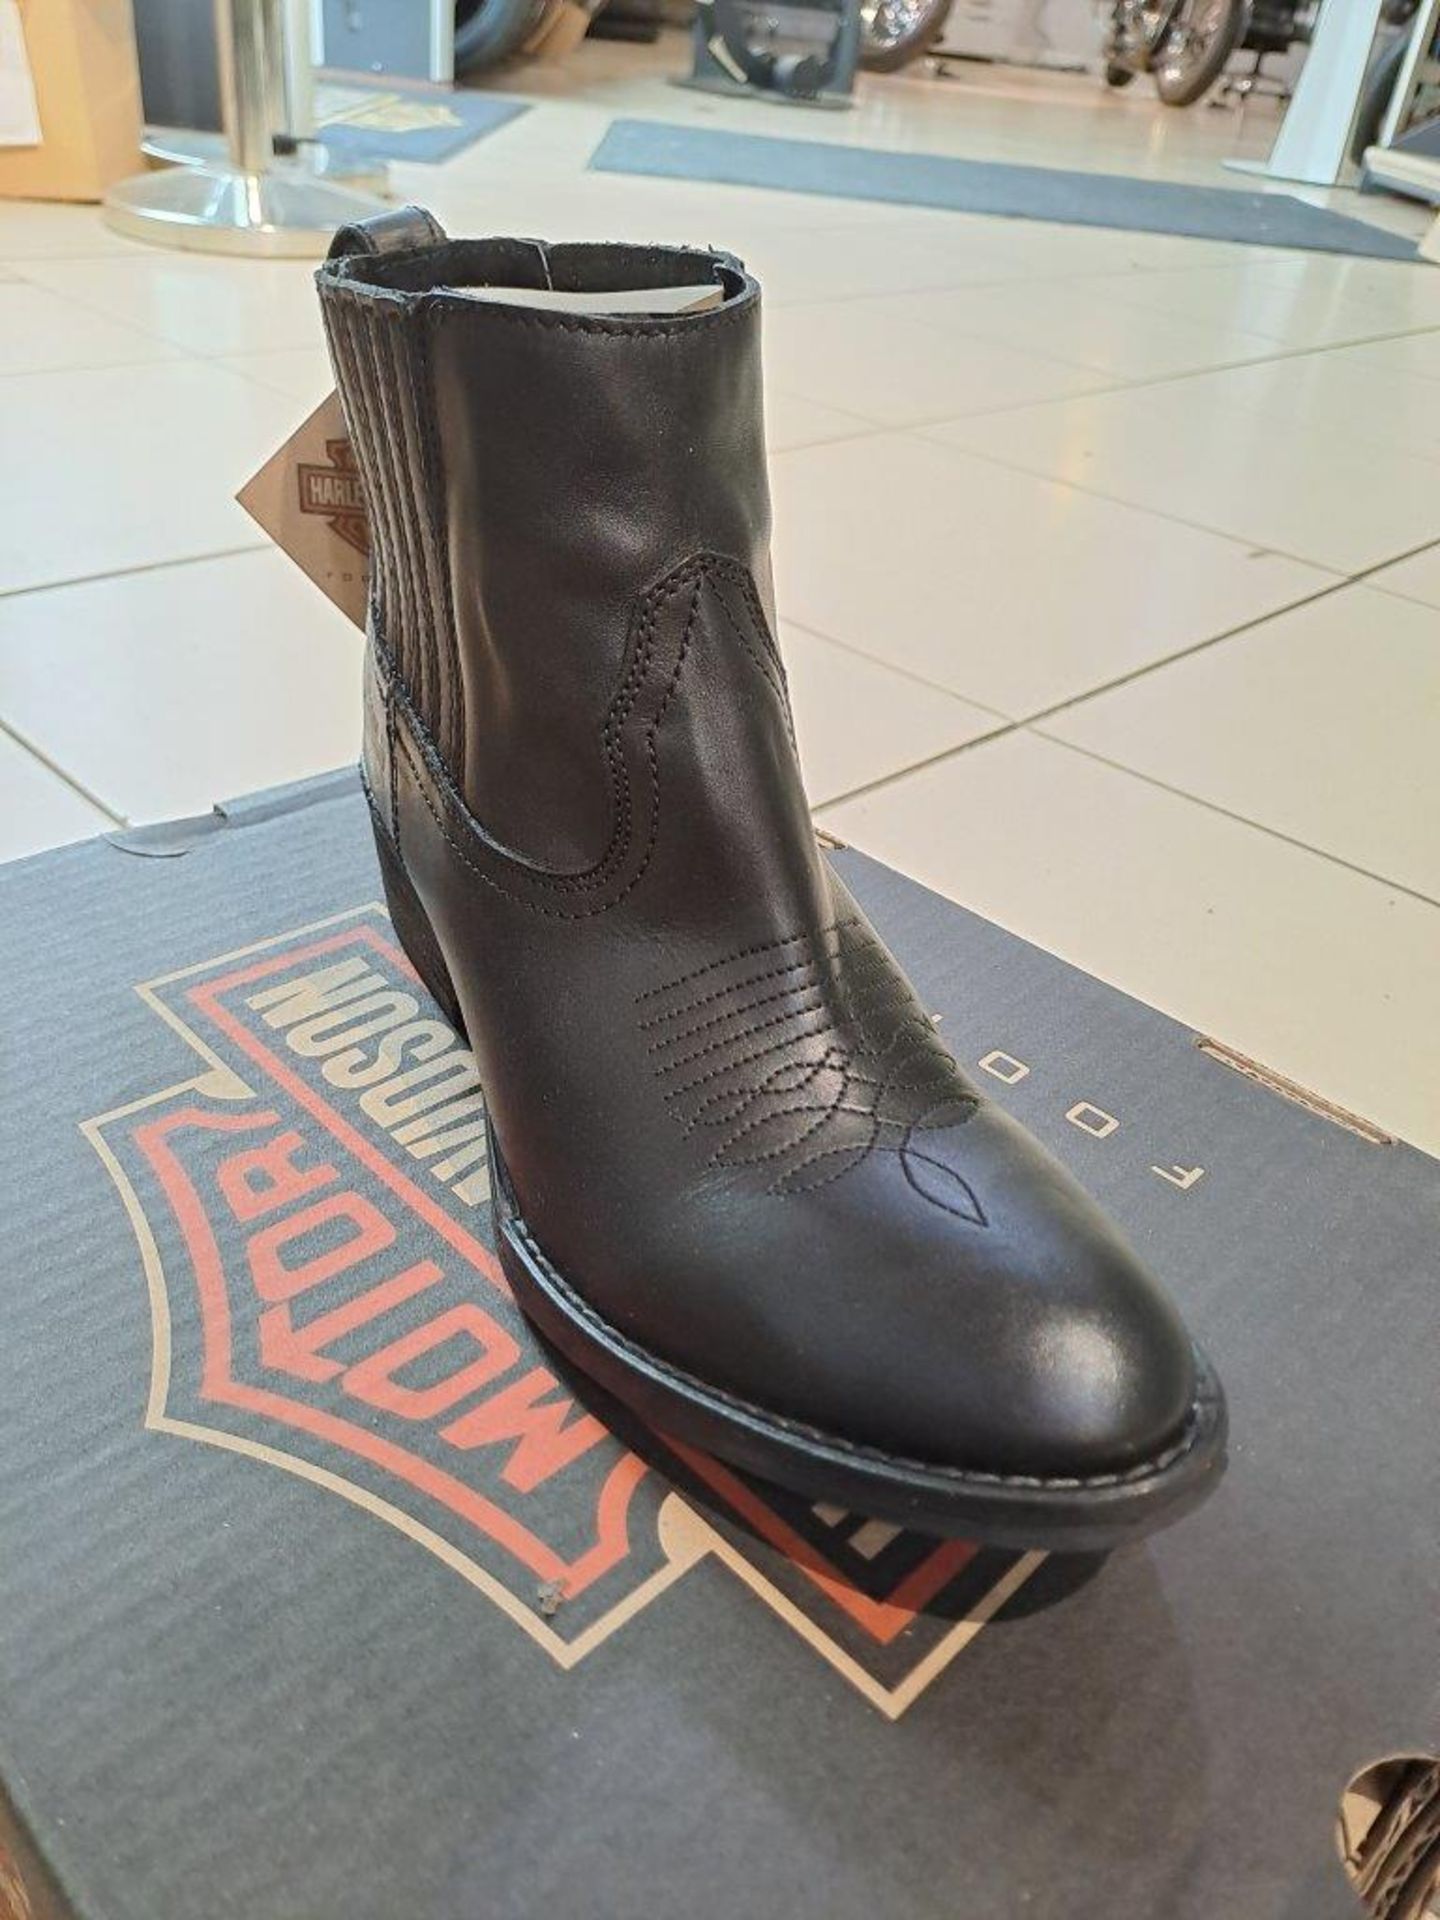 Harley Davidson Curwood Size 7 Womens Boots - Image 3 of 8